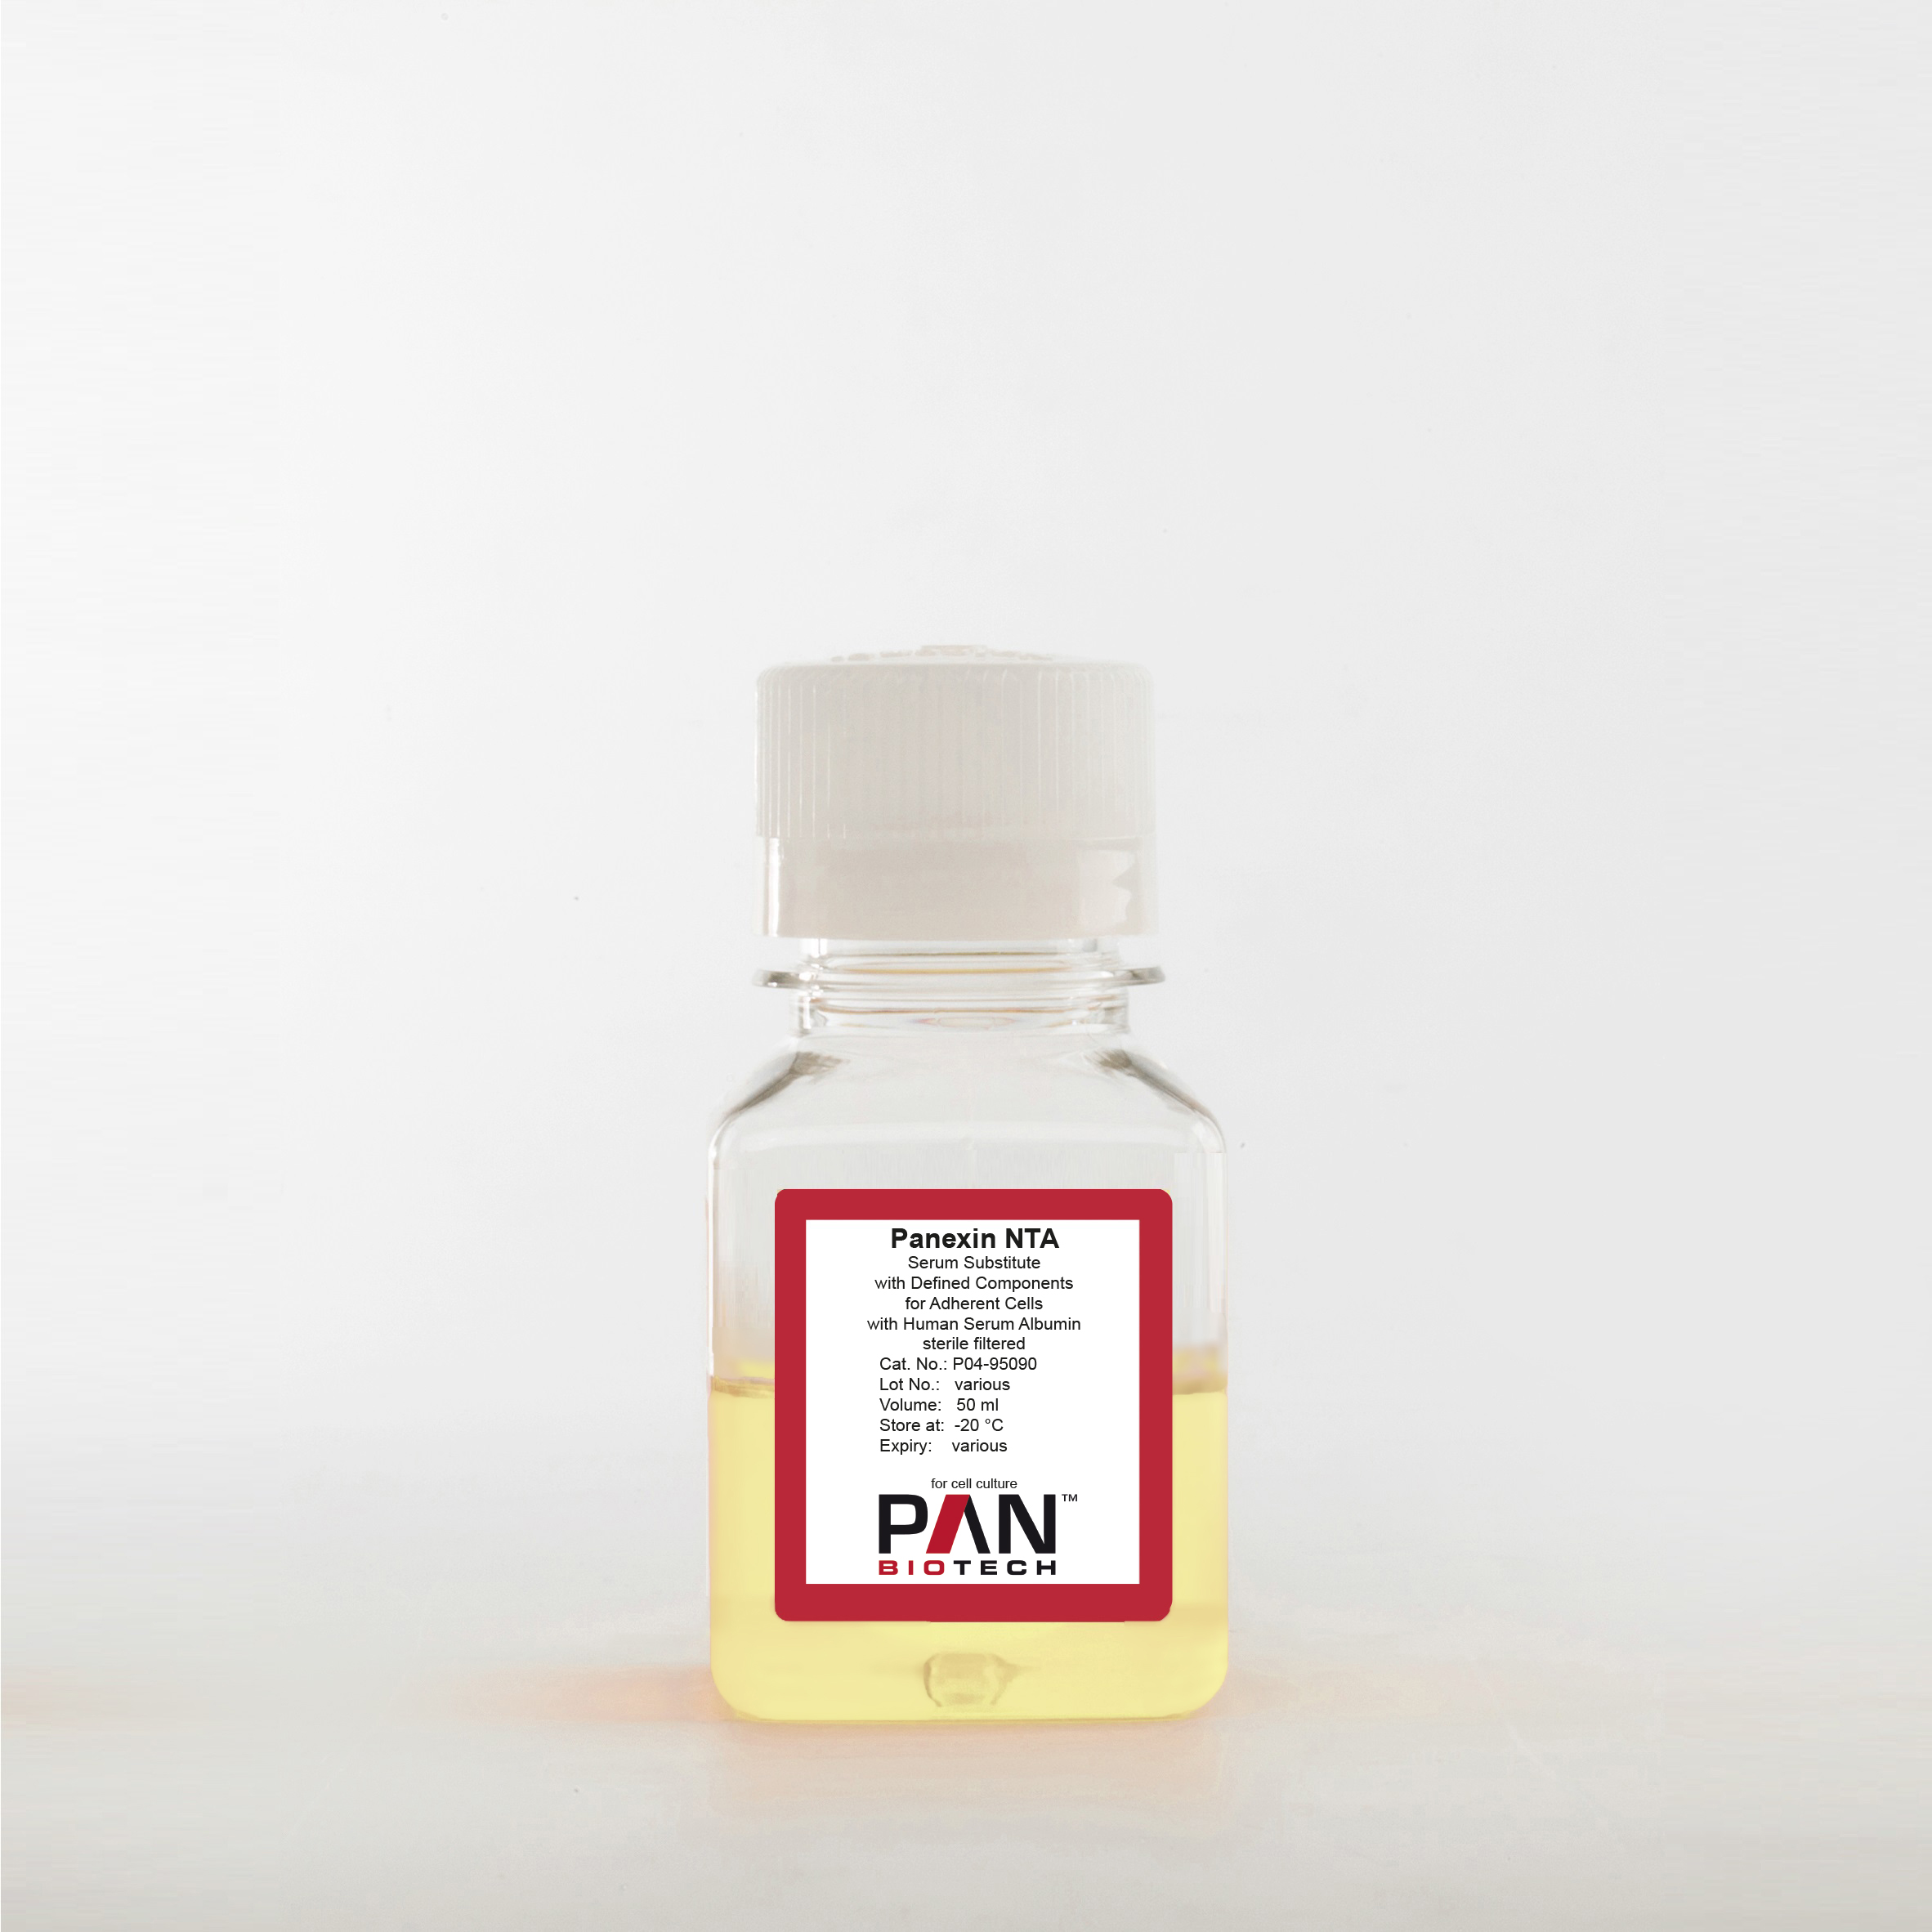 Panexin NTA Serum Substitute with Defined Components for Adherent Cells with Human Serum Albumin